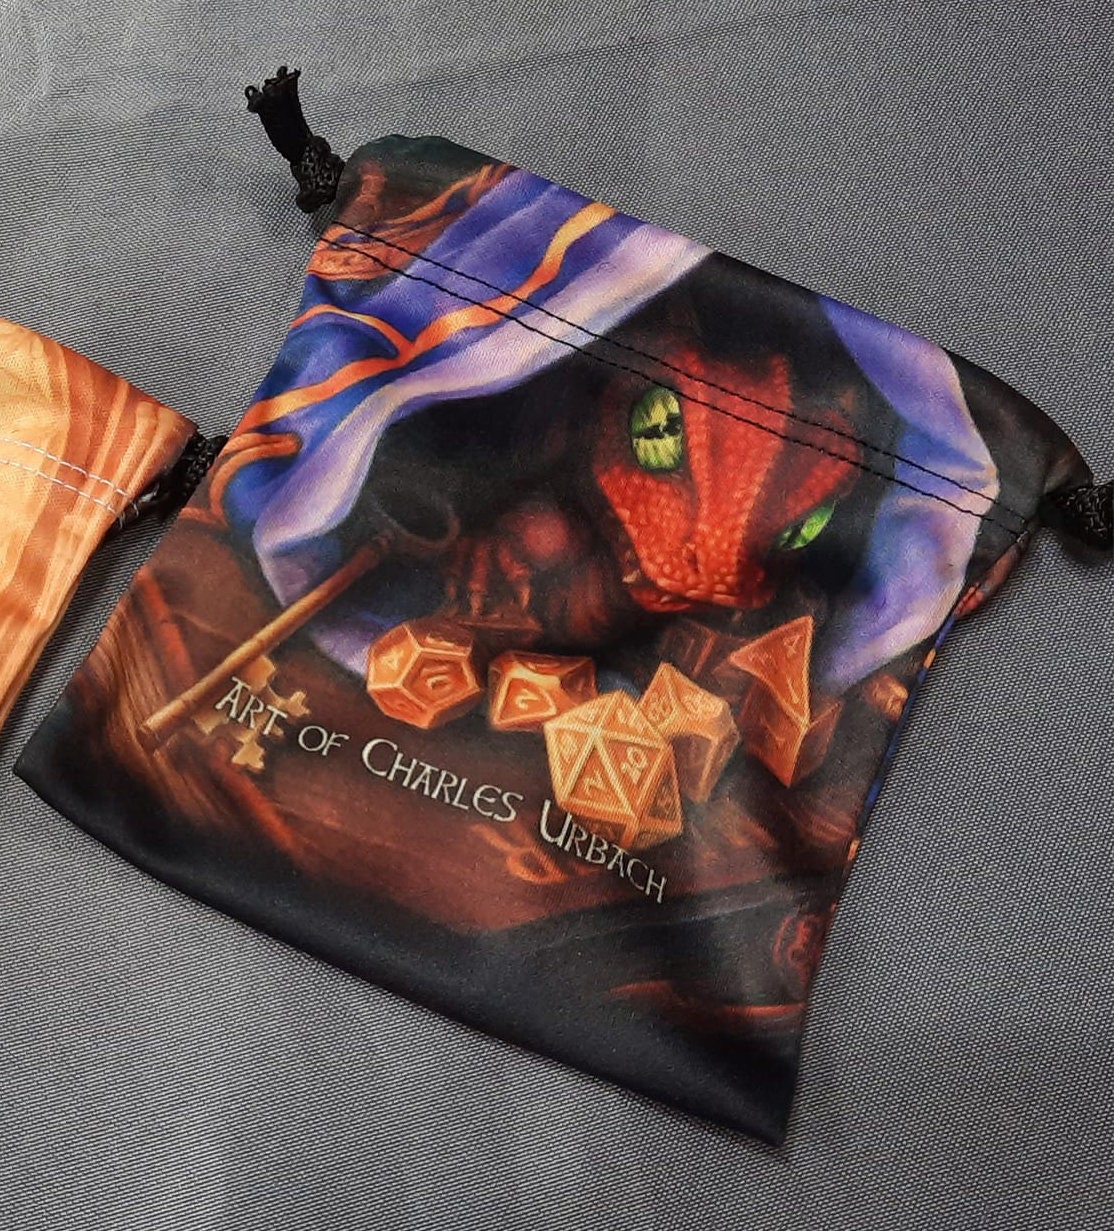 Amazon.com: Dungeons & Dragon Bag of Holding Gamer Pouch : Toys & Games